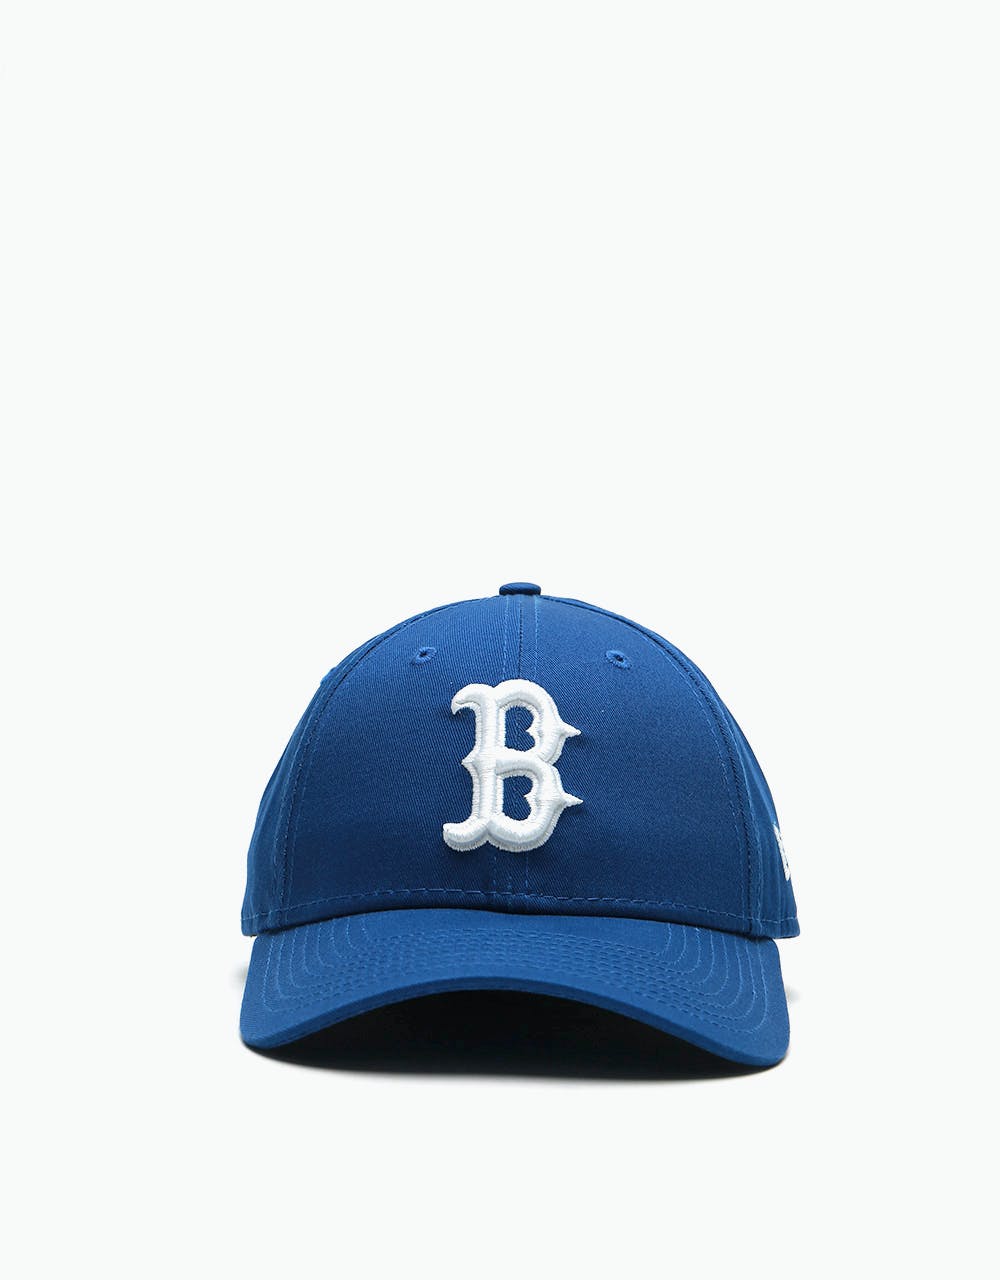 New Era 9Forty Boston Red Sox League Essential Cap - Royal Blue